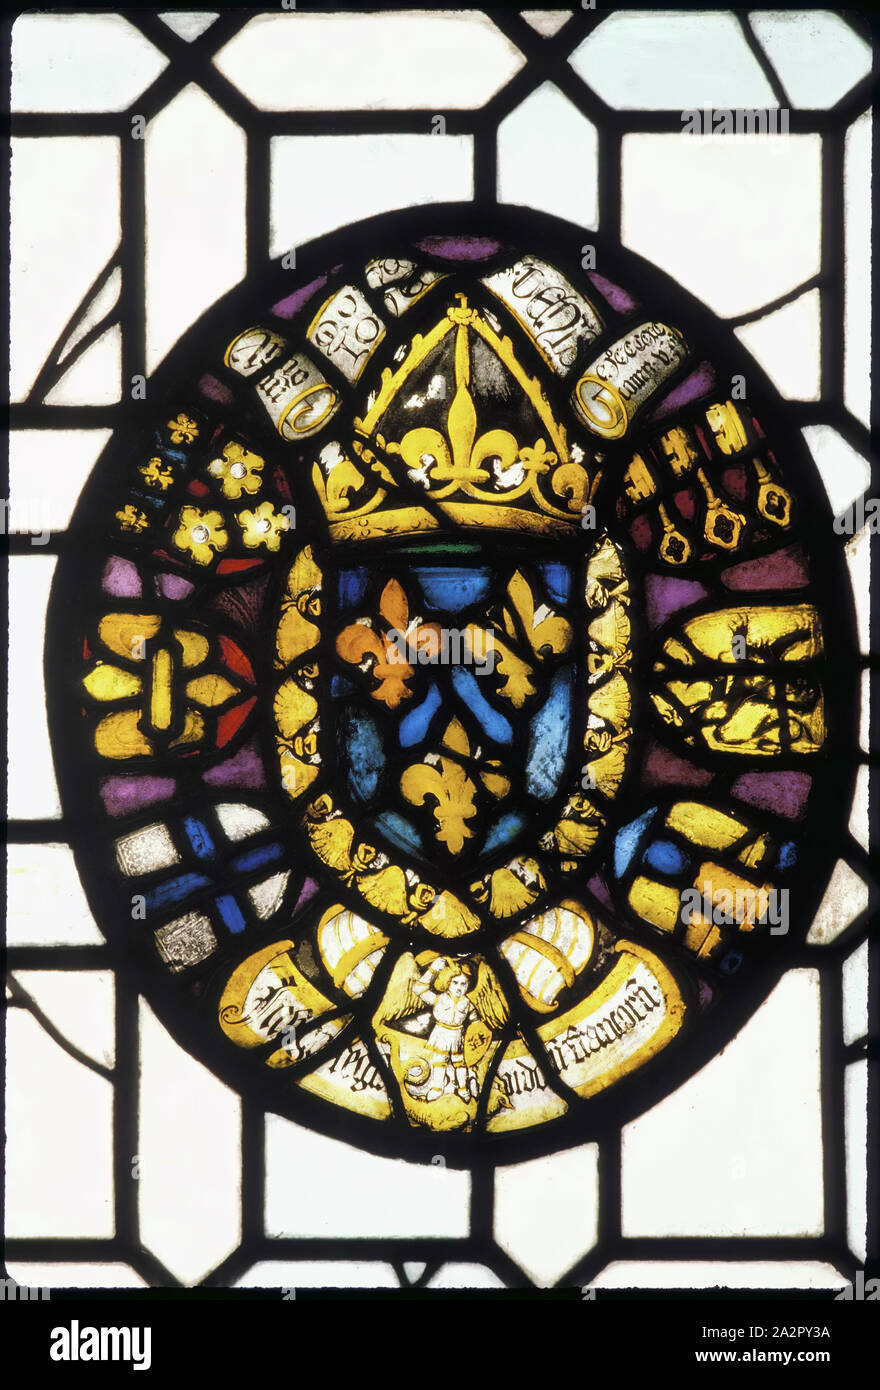 possibly Unknown (Swiss), Heraldic Panel Commemorating the Marriage of Charles VIII of France and Anne of Brittany and the Treaty of Sable, 1490, late 16th/early 17th Century, Stained glass: Pot metal; white glass with silver stain, 28 3/4 x 44 7/8 x 2 1/4 in. (73.0 x 114.0 x 5.7 cm Stock Photo